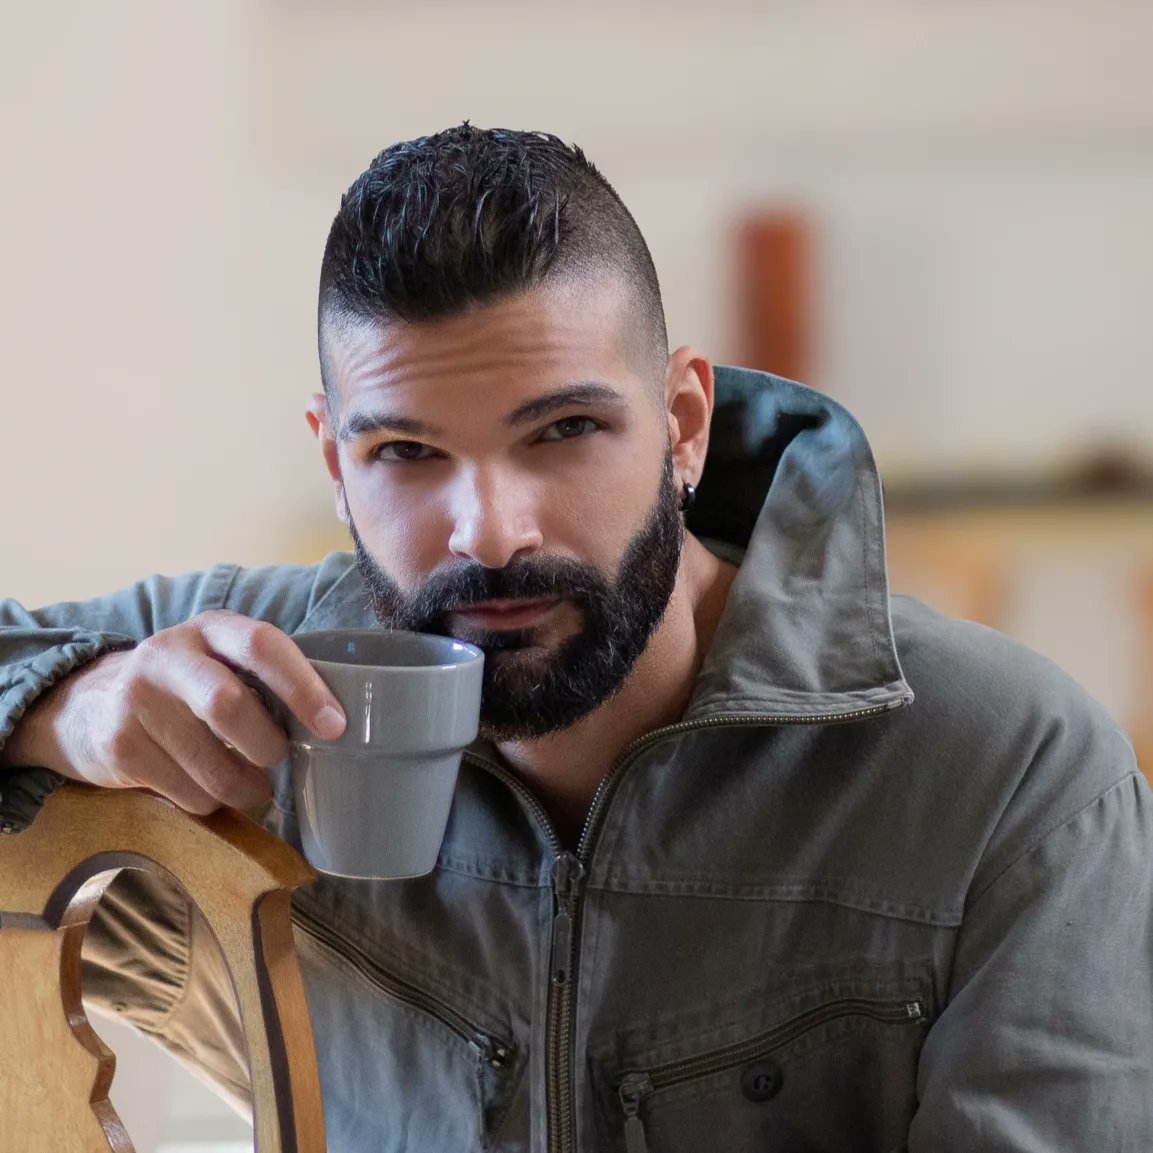 But first, coffee. ☕️ Photo by @asmarsary Dressed by @signatureboutiques #MikeMassy #مايك_ماسي #coffee #قهوة